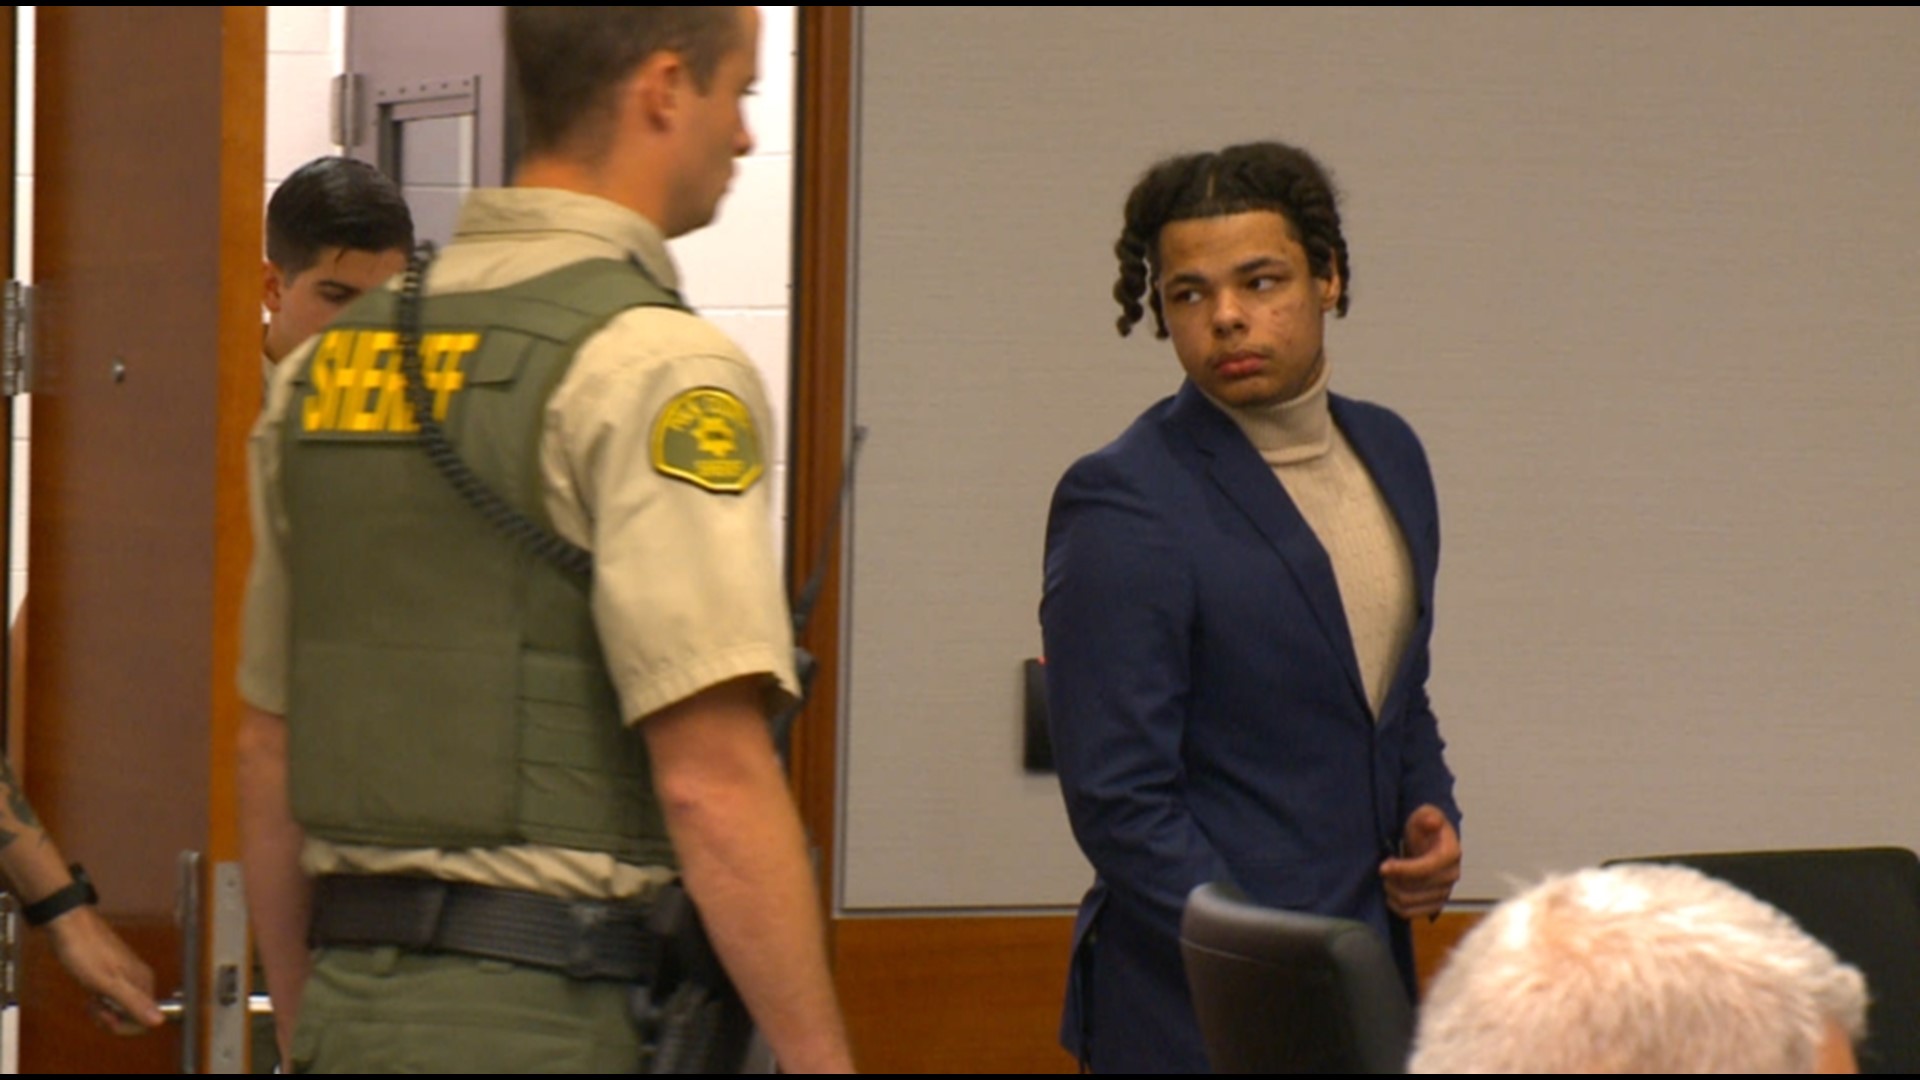 The prosecution laid out the evidence they believe will show Tukes' guilt, while the defense said the state won't provide enough context around the evidence.